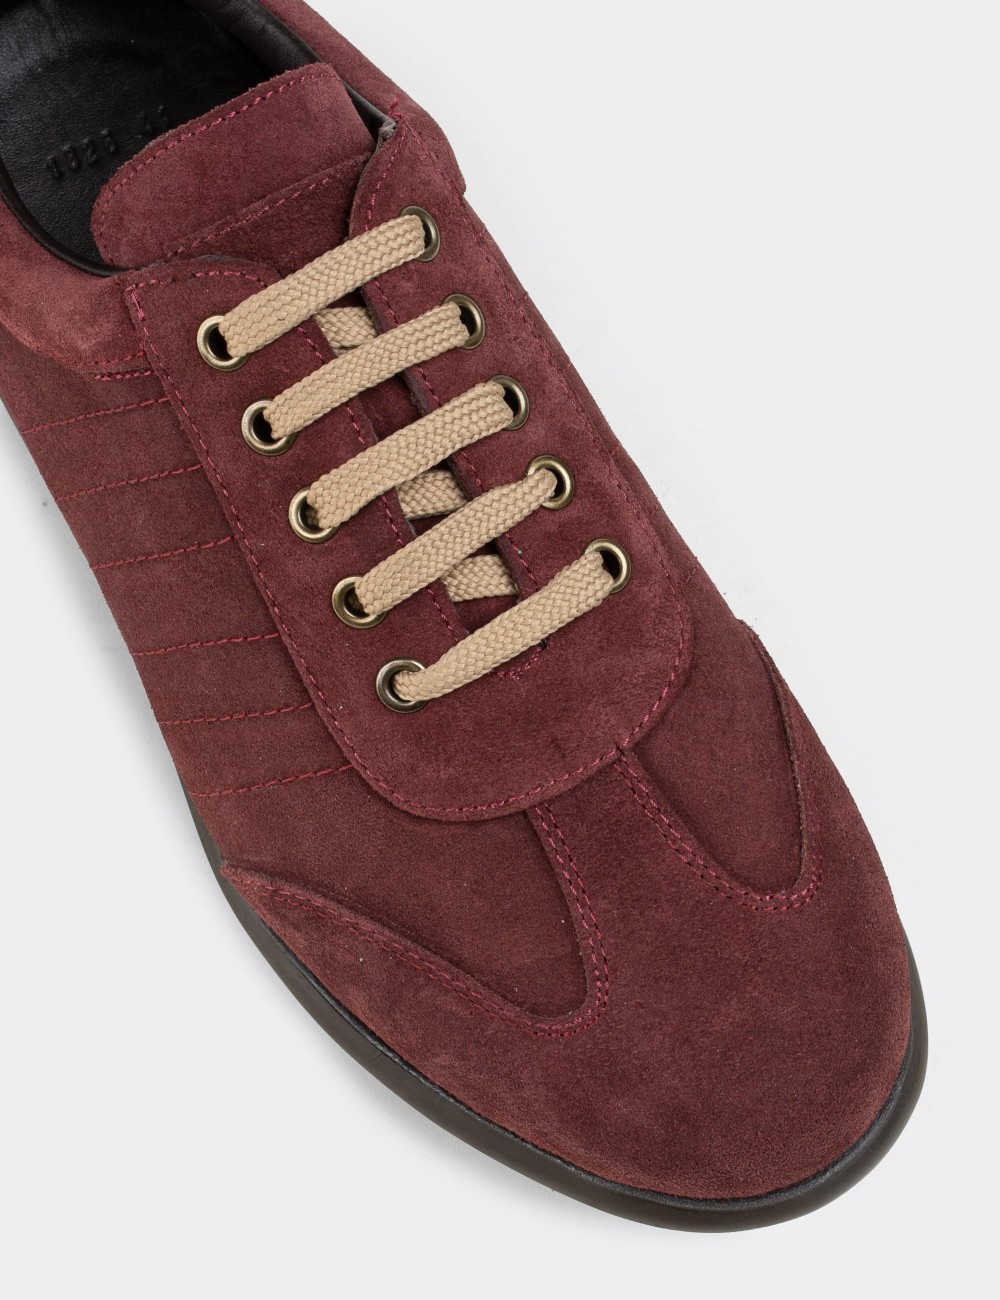 Burgundy Suede Leather Lace-up Shoes - 01826MBRDC02